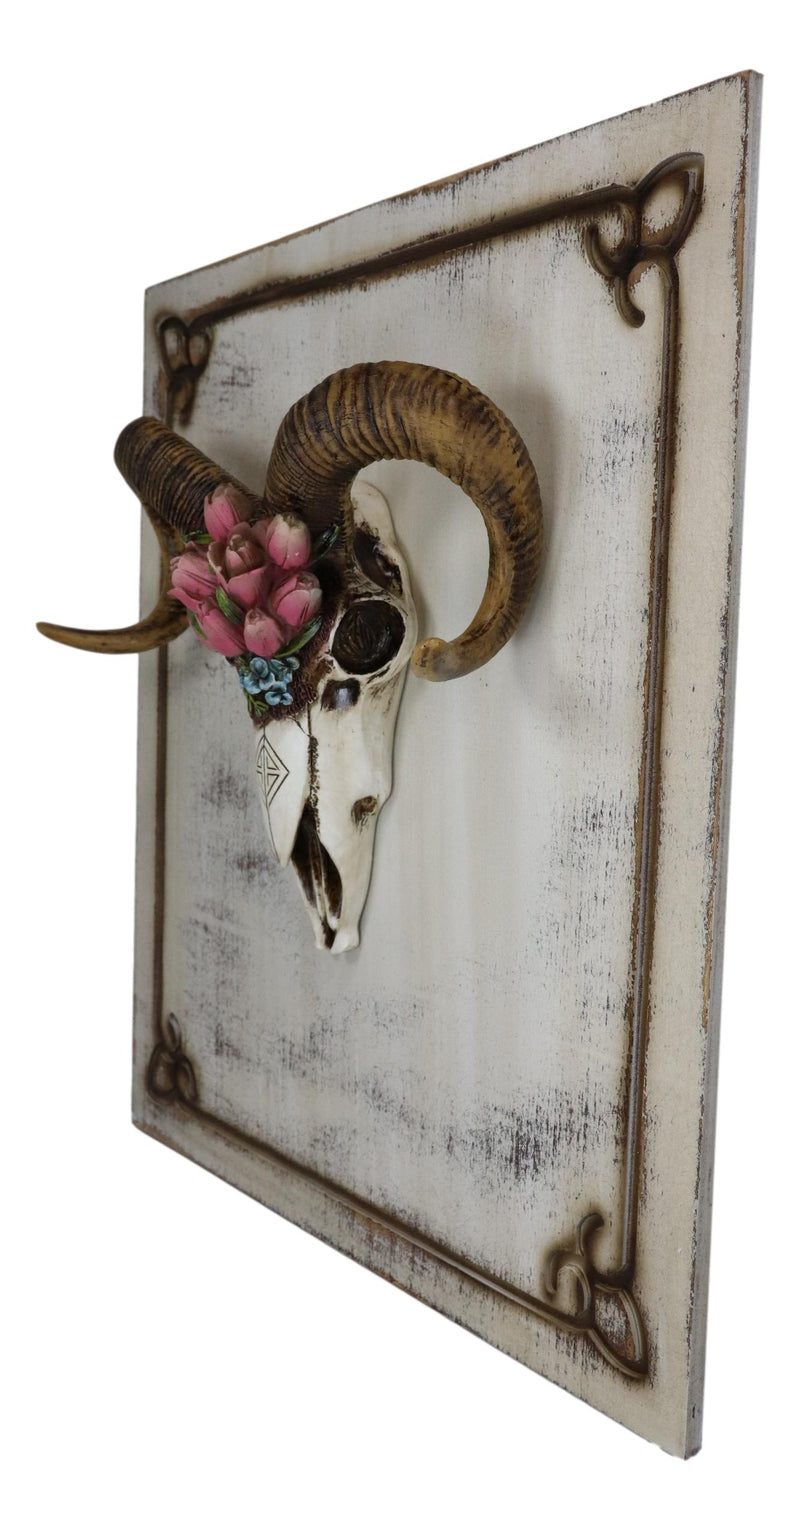 Rustic Western Corsican Ram Skull With Red Tulips Wooden Wall Decor Plaque